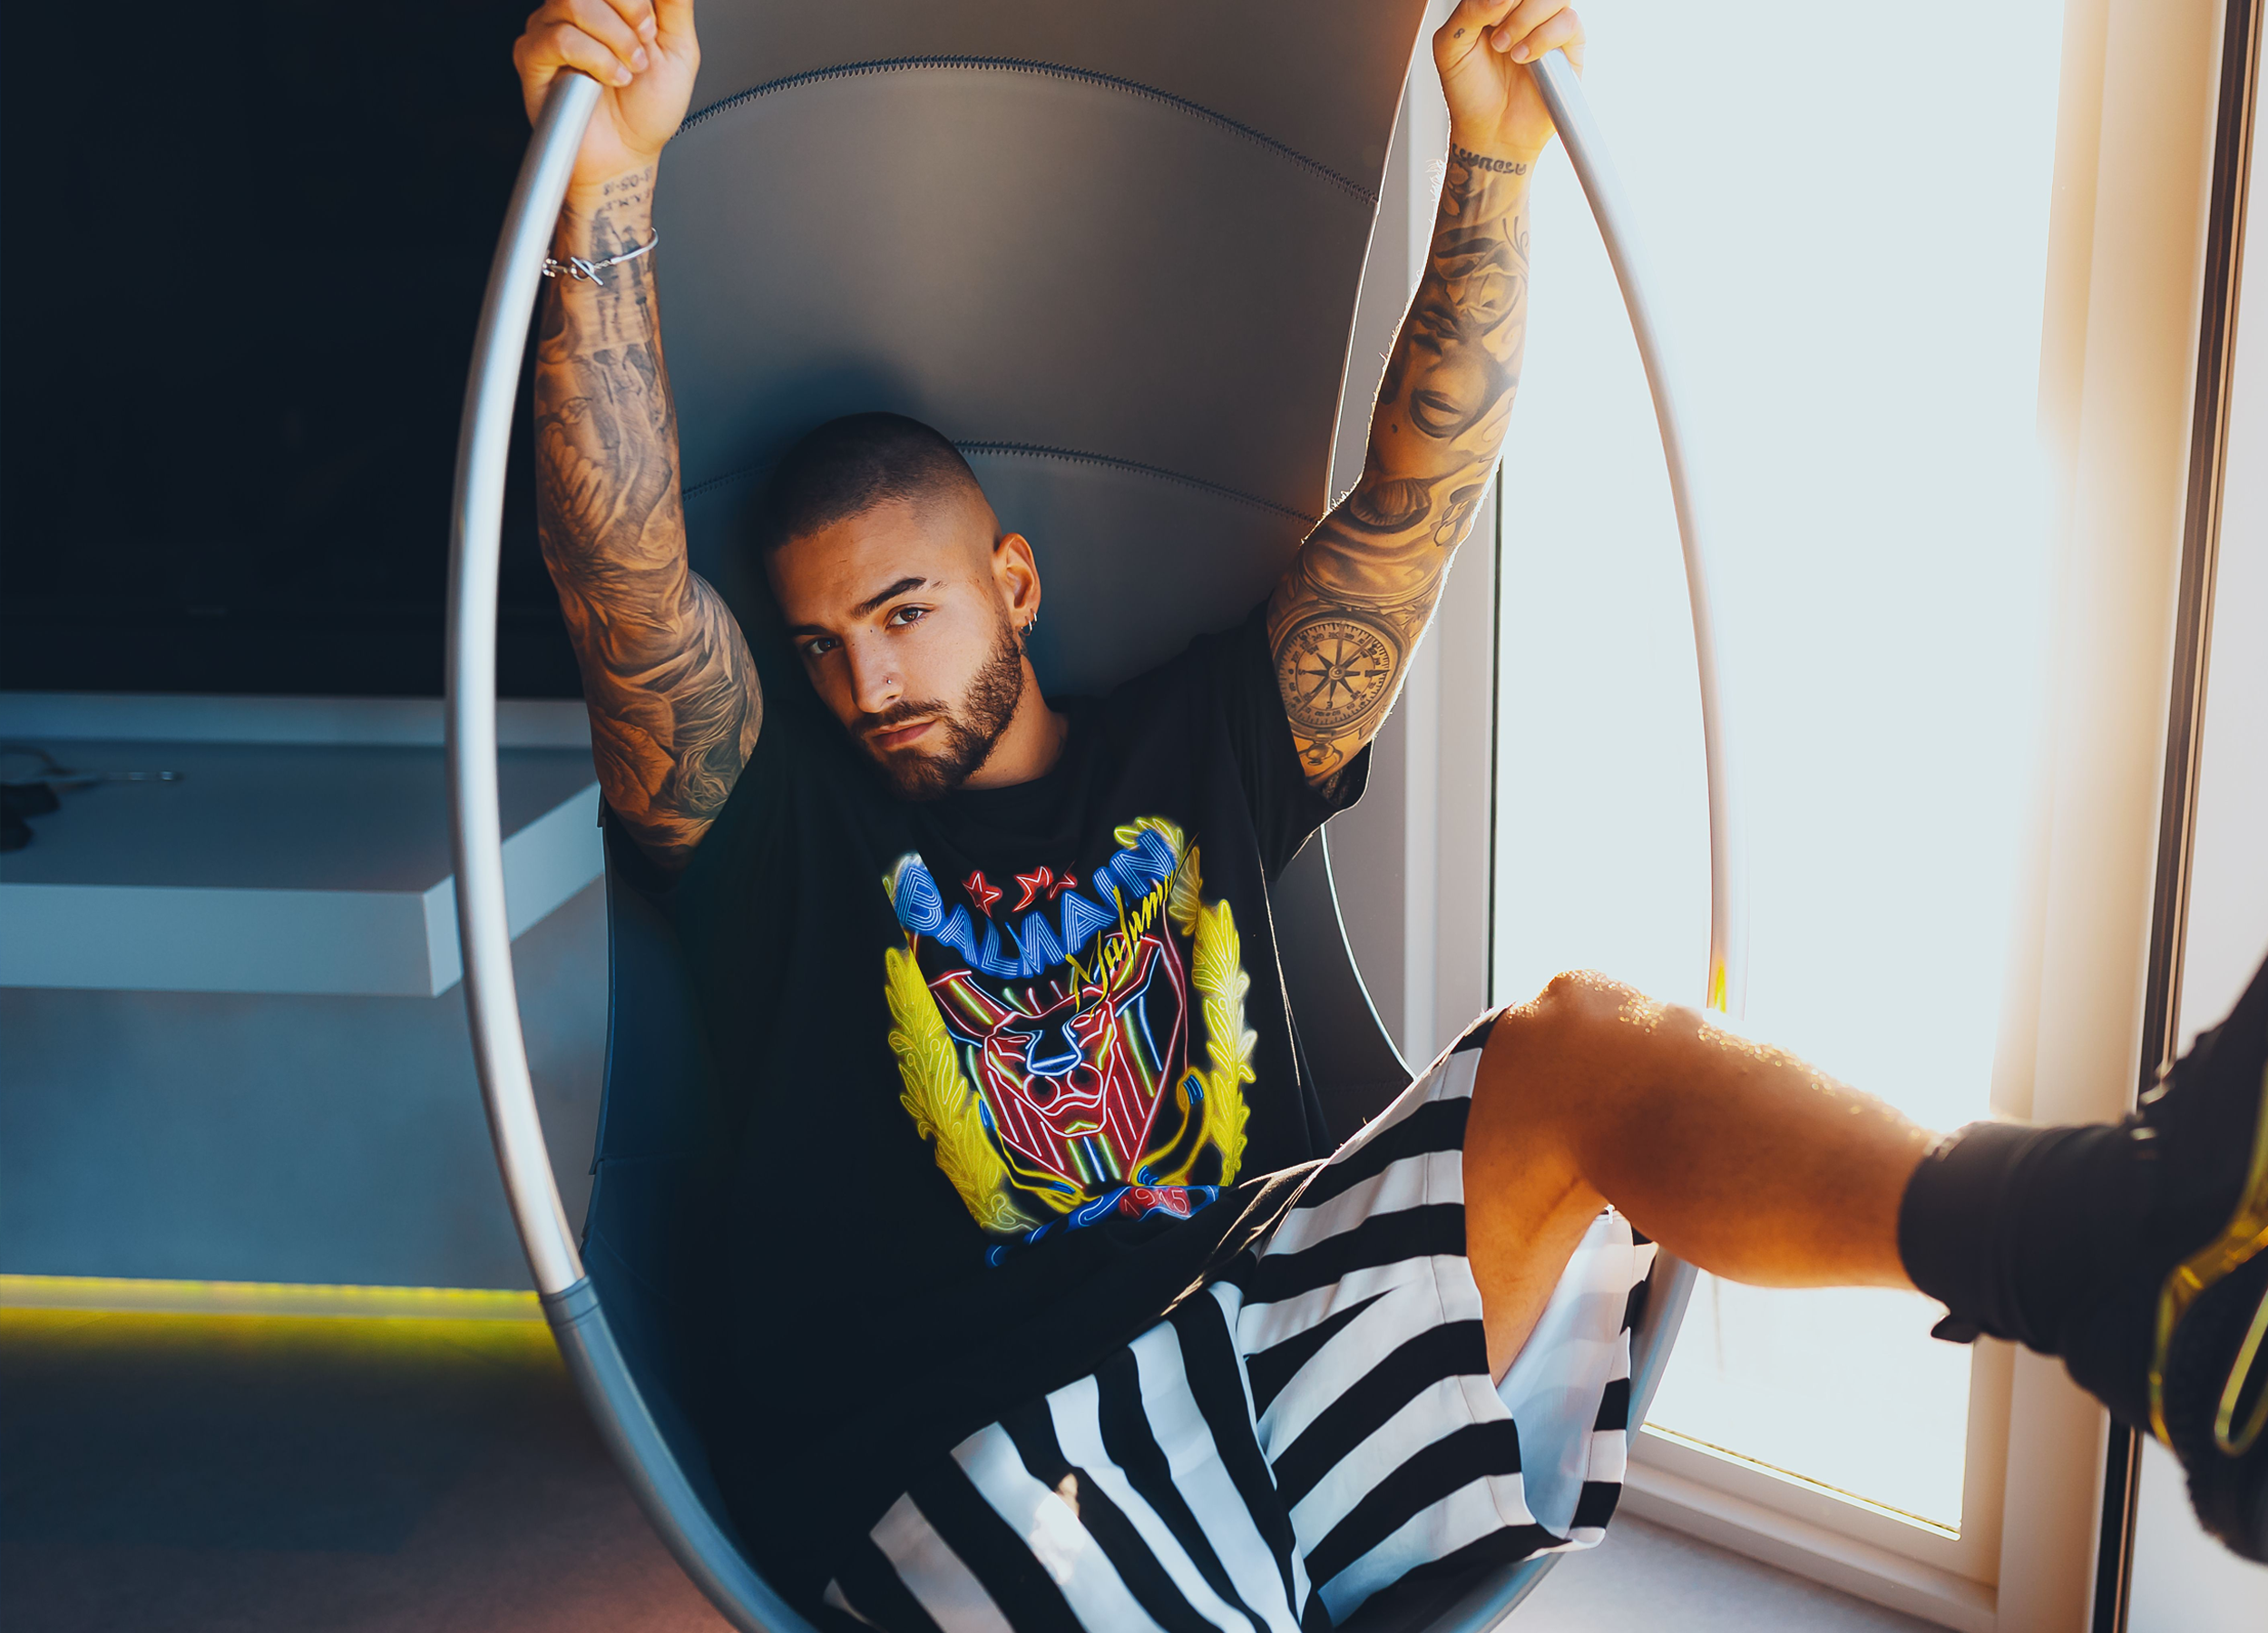 Maluma Dazzles Paris Fashion Week: From Chic to Street in a Snap